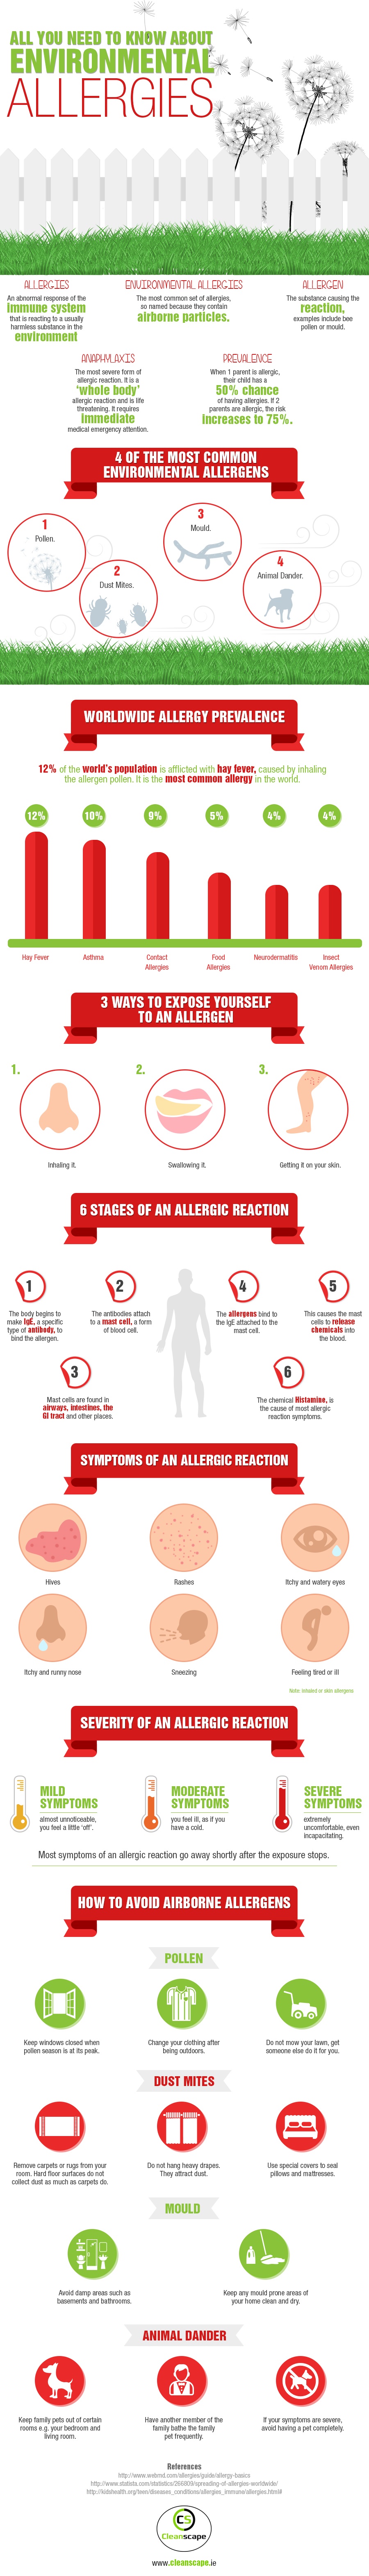 Need-to-Know-About-Environmental-Allergies